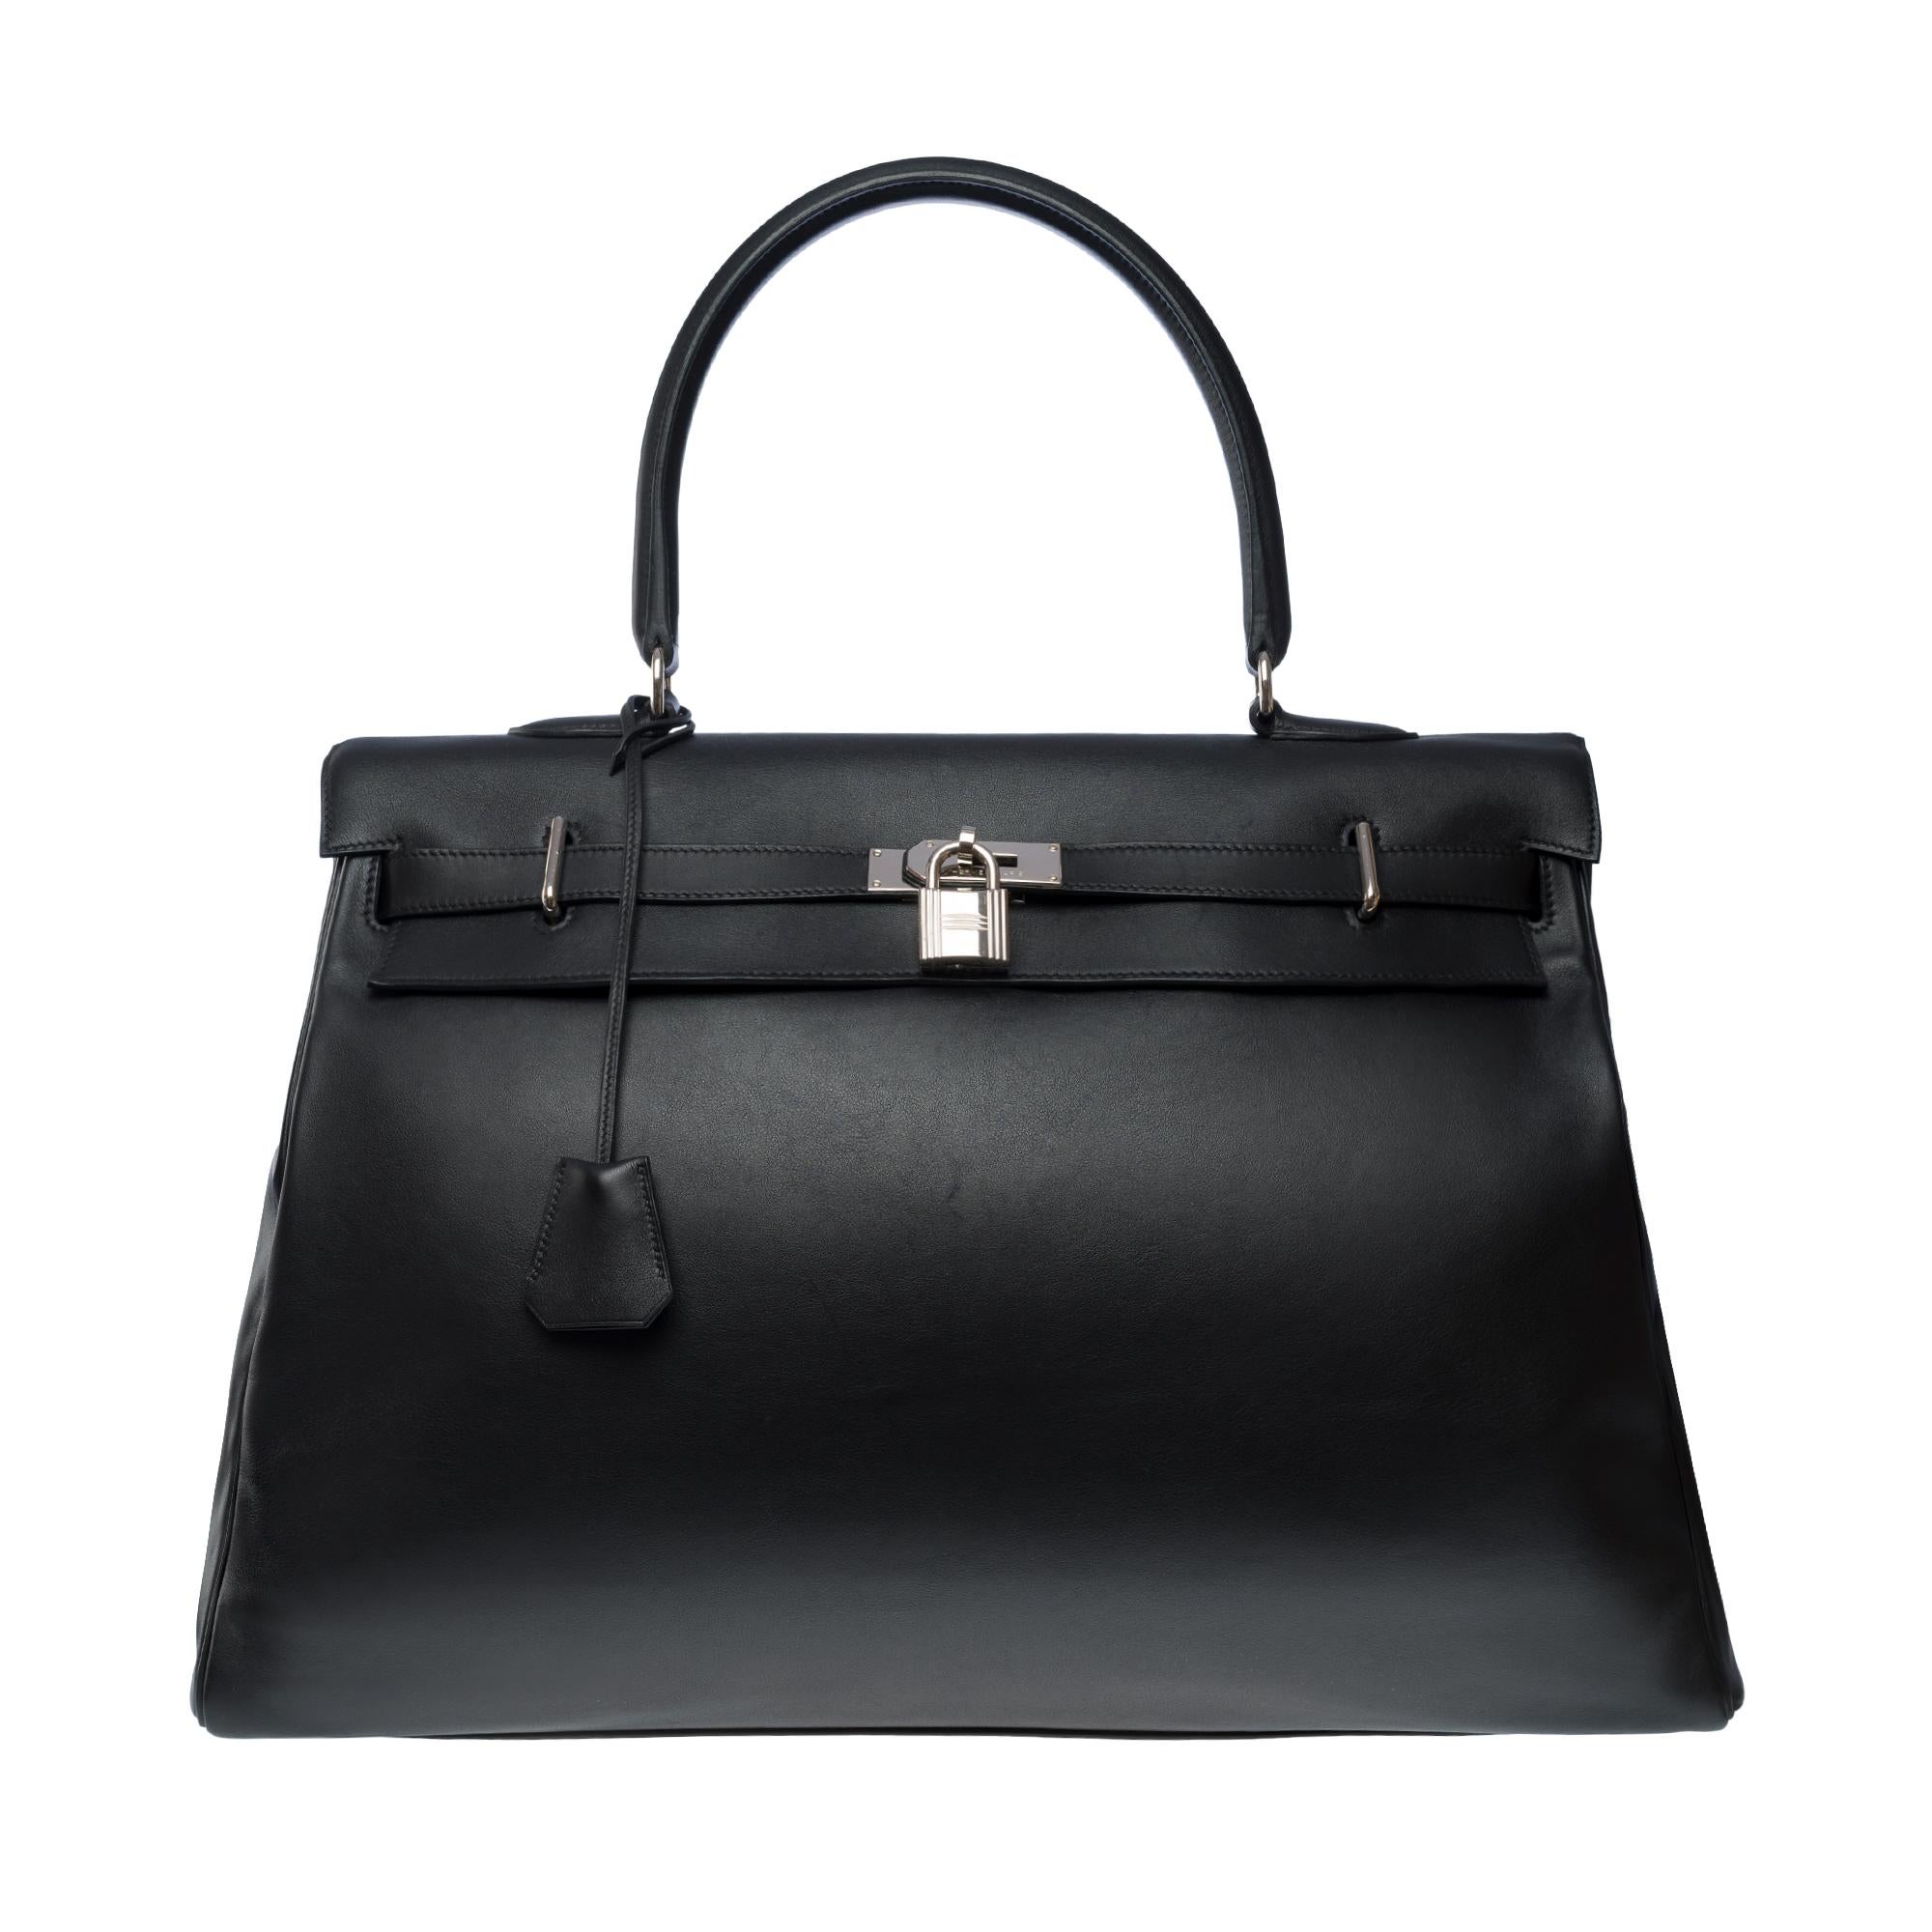 Spacious Hermès Kelly Relax 50 weekend bag in black Swift leather, palladium metal hardware, black leather handle for hand or shoulder carry

Flap closure
Black leather inner lining, one patch pocket
Signature: 